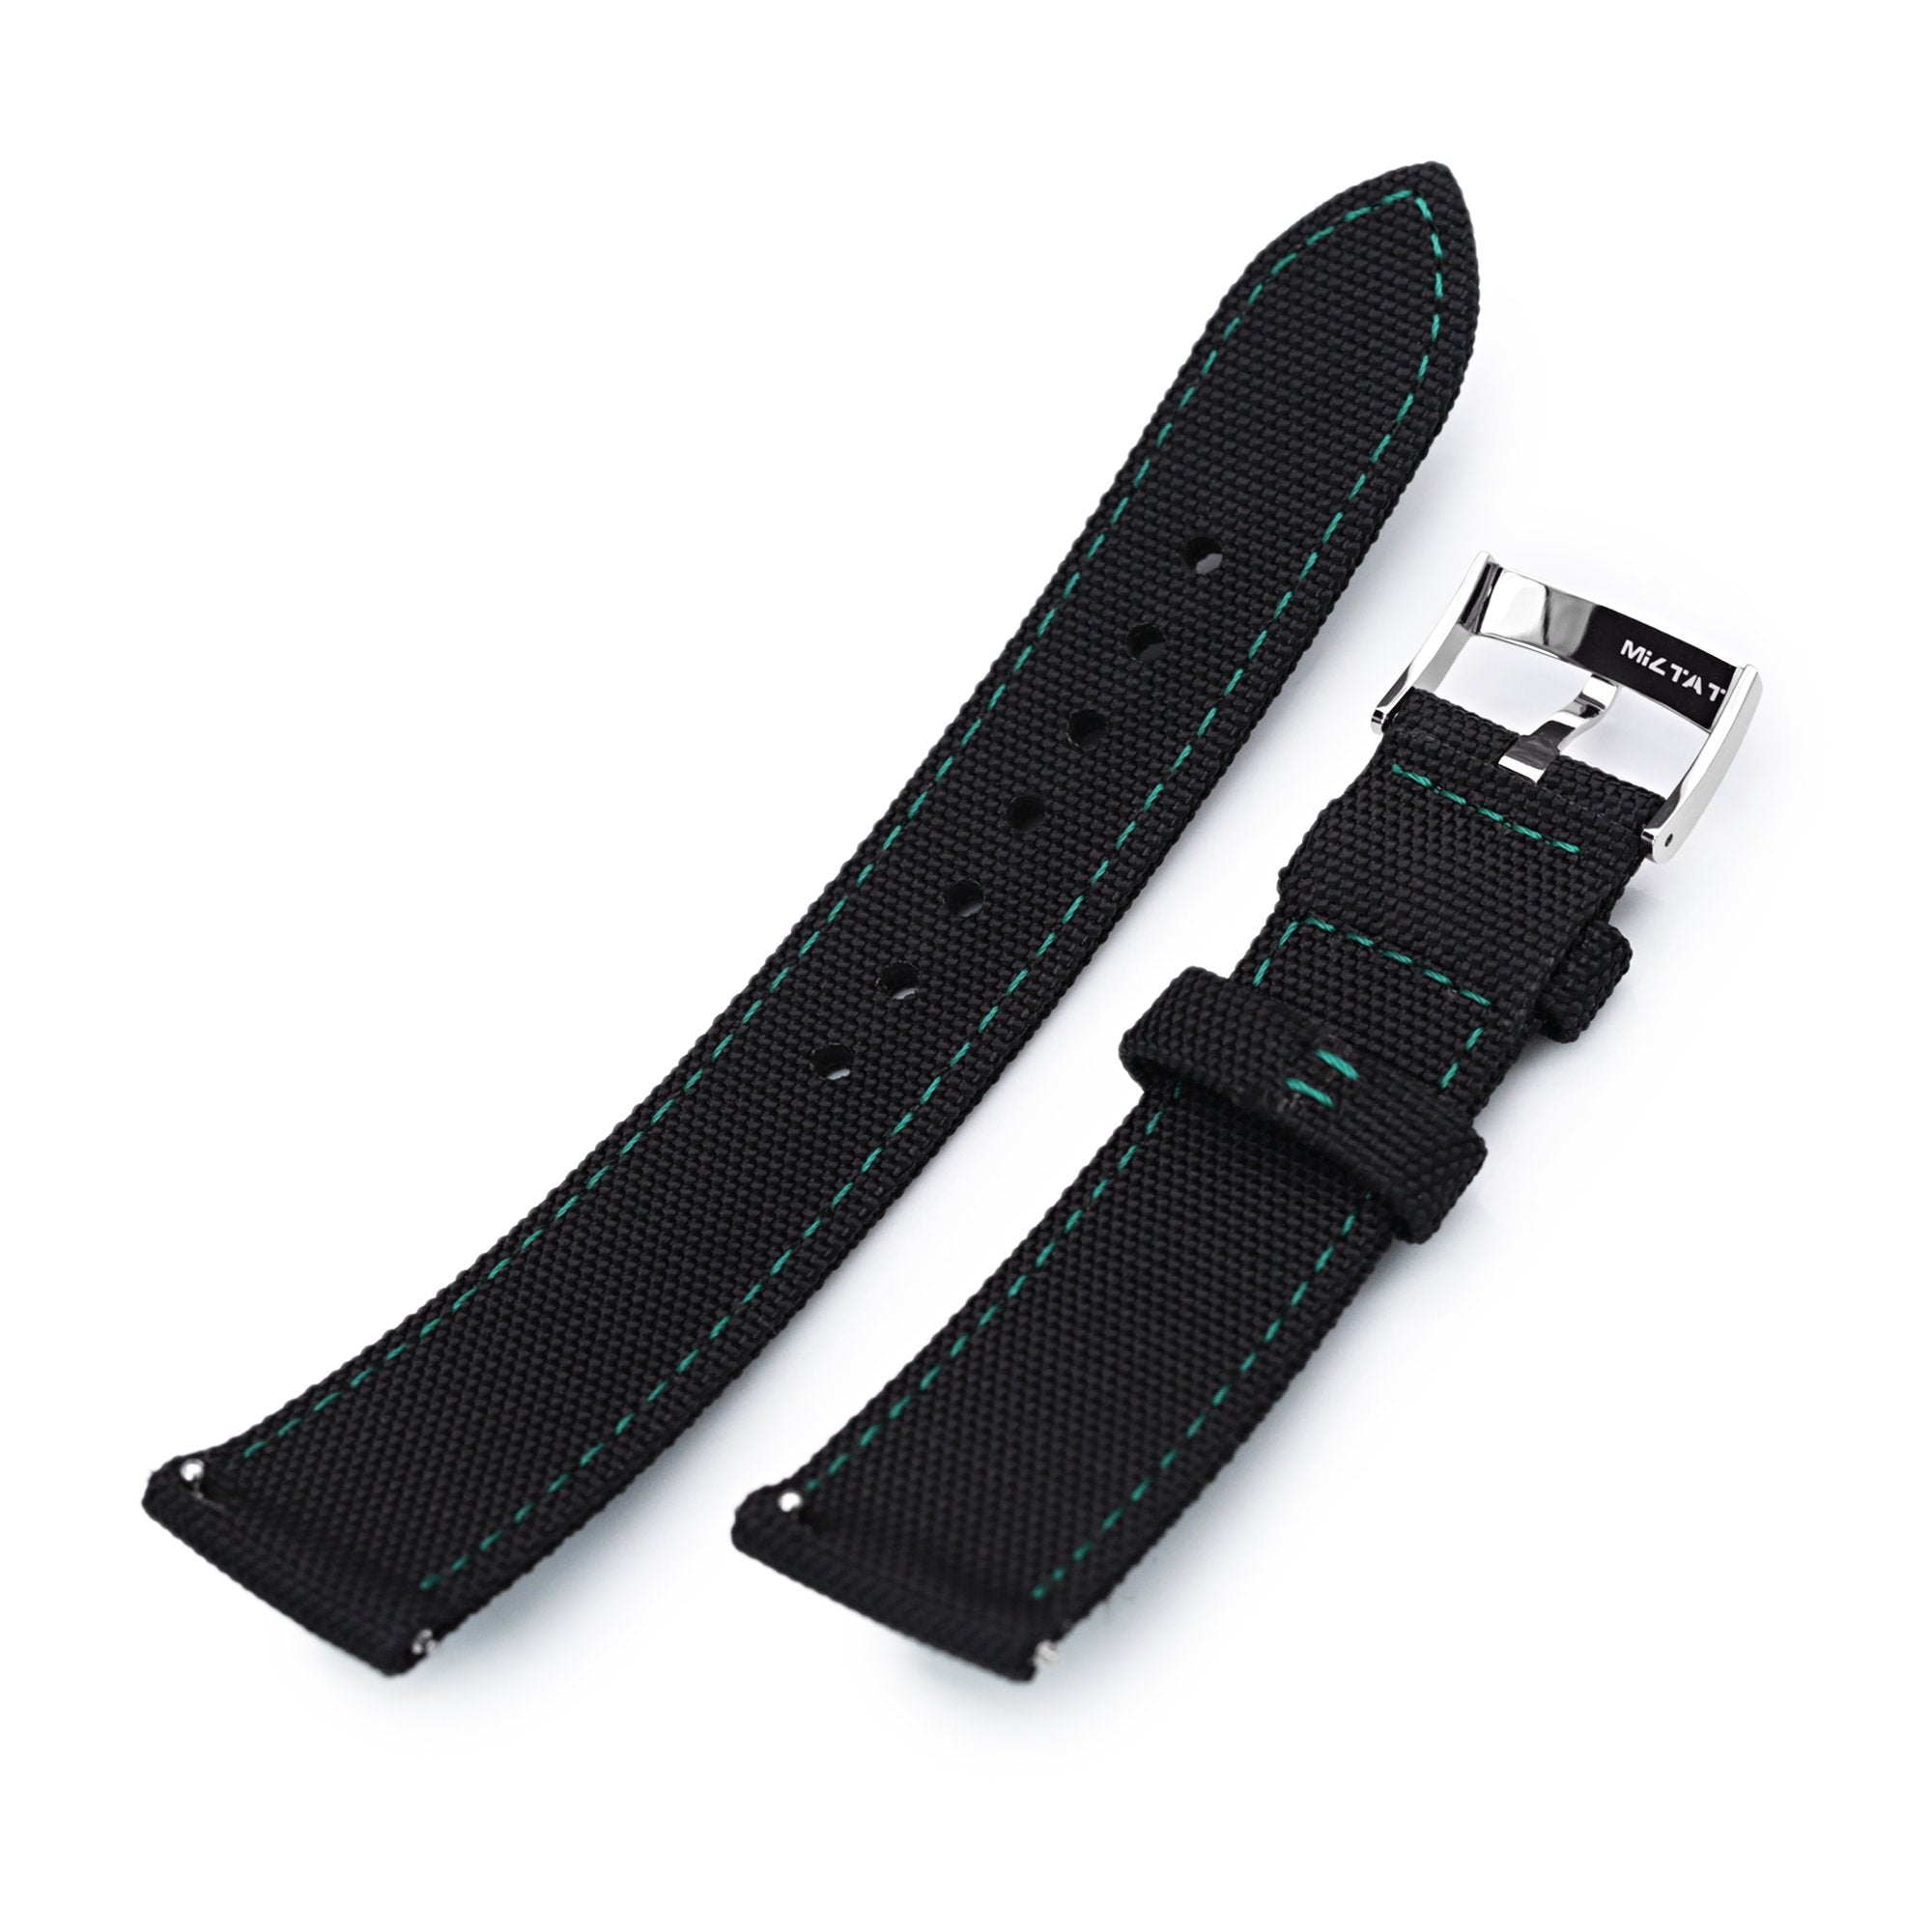 20mm Sailcloth Strap Black Quick Release Nylon Watch Band, Green Stitching Strapcode Watch Bands